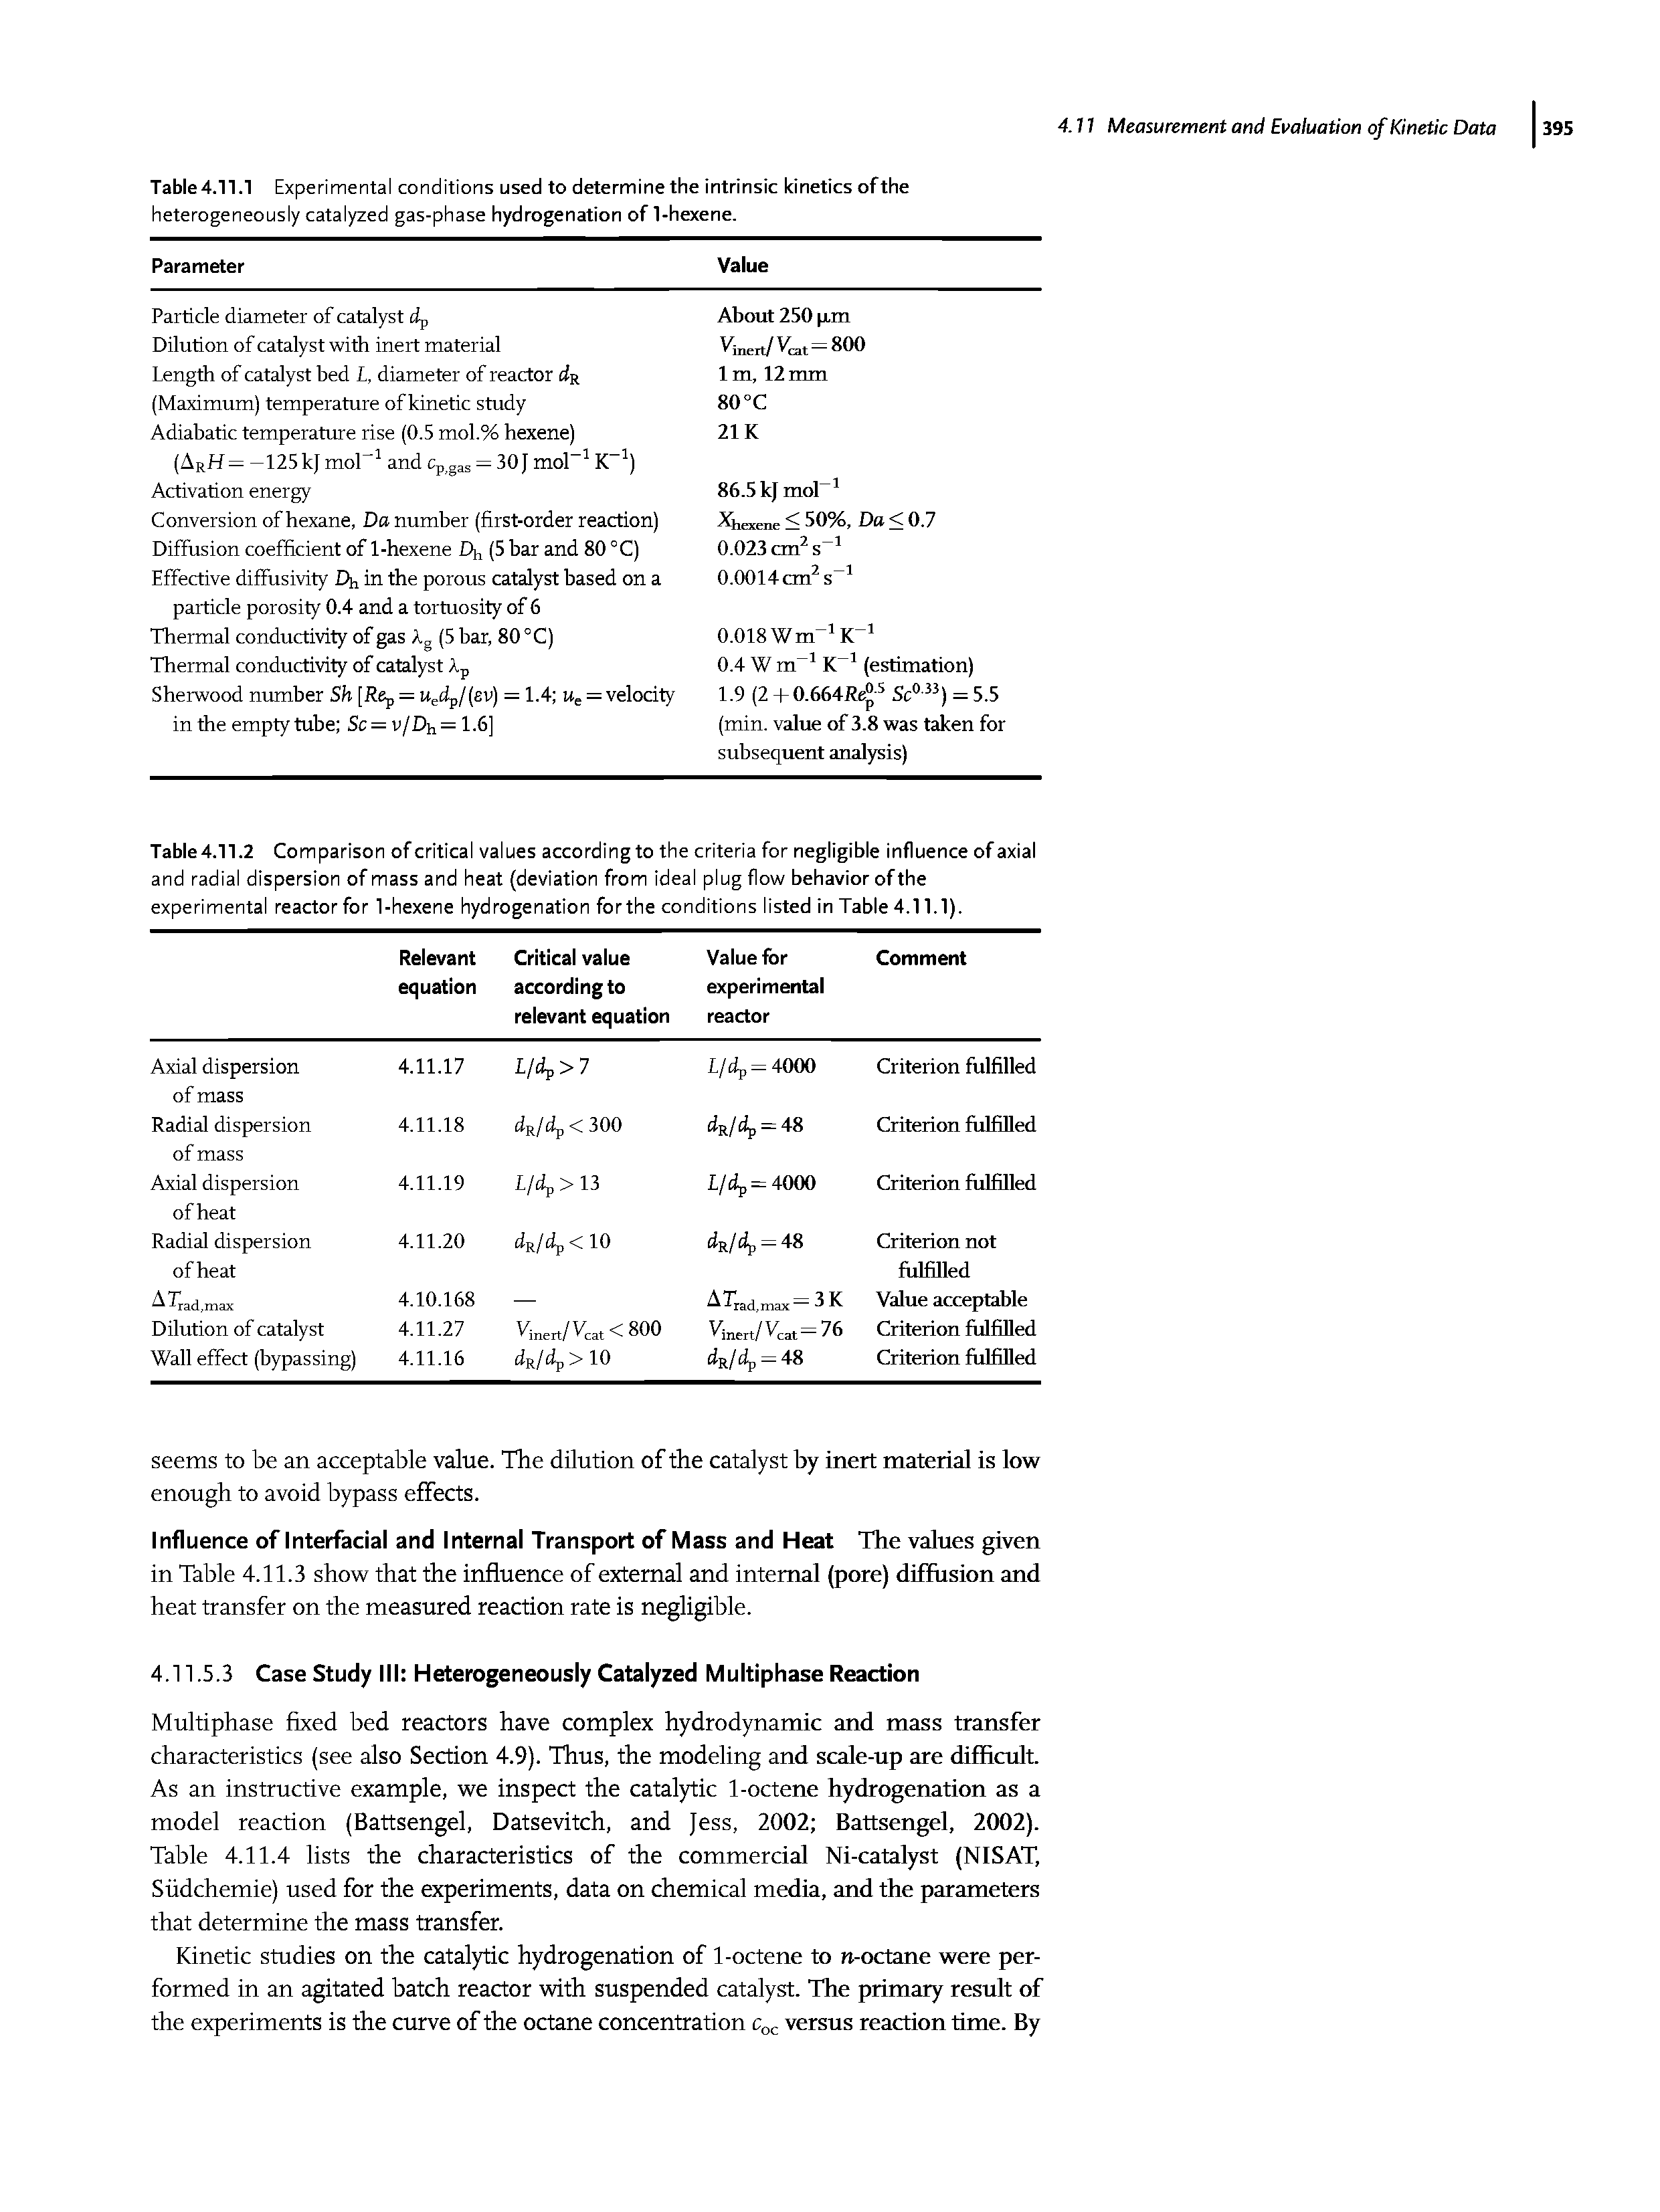 Table 4.11.1 Experimental conditions used to determine the intrinsic kinetics of the heterogeneously catalyzed gas-phase hydrogenation of 1-hexene.